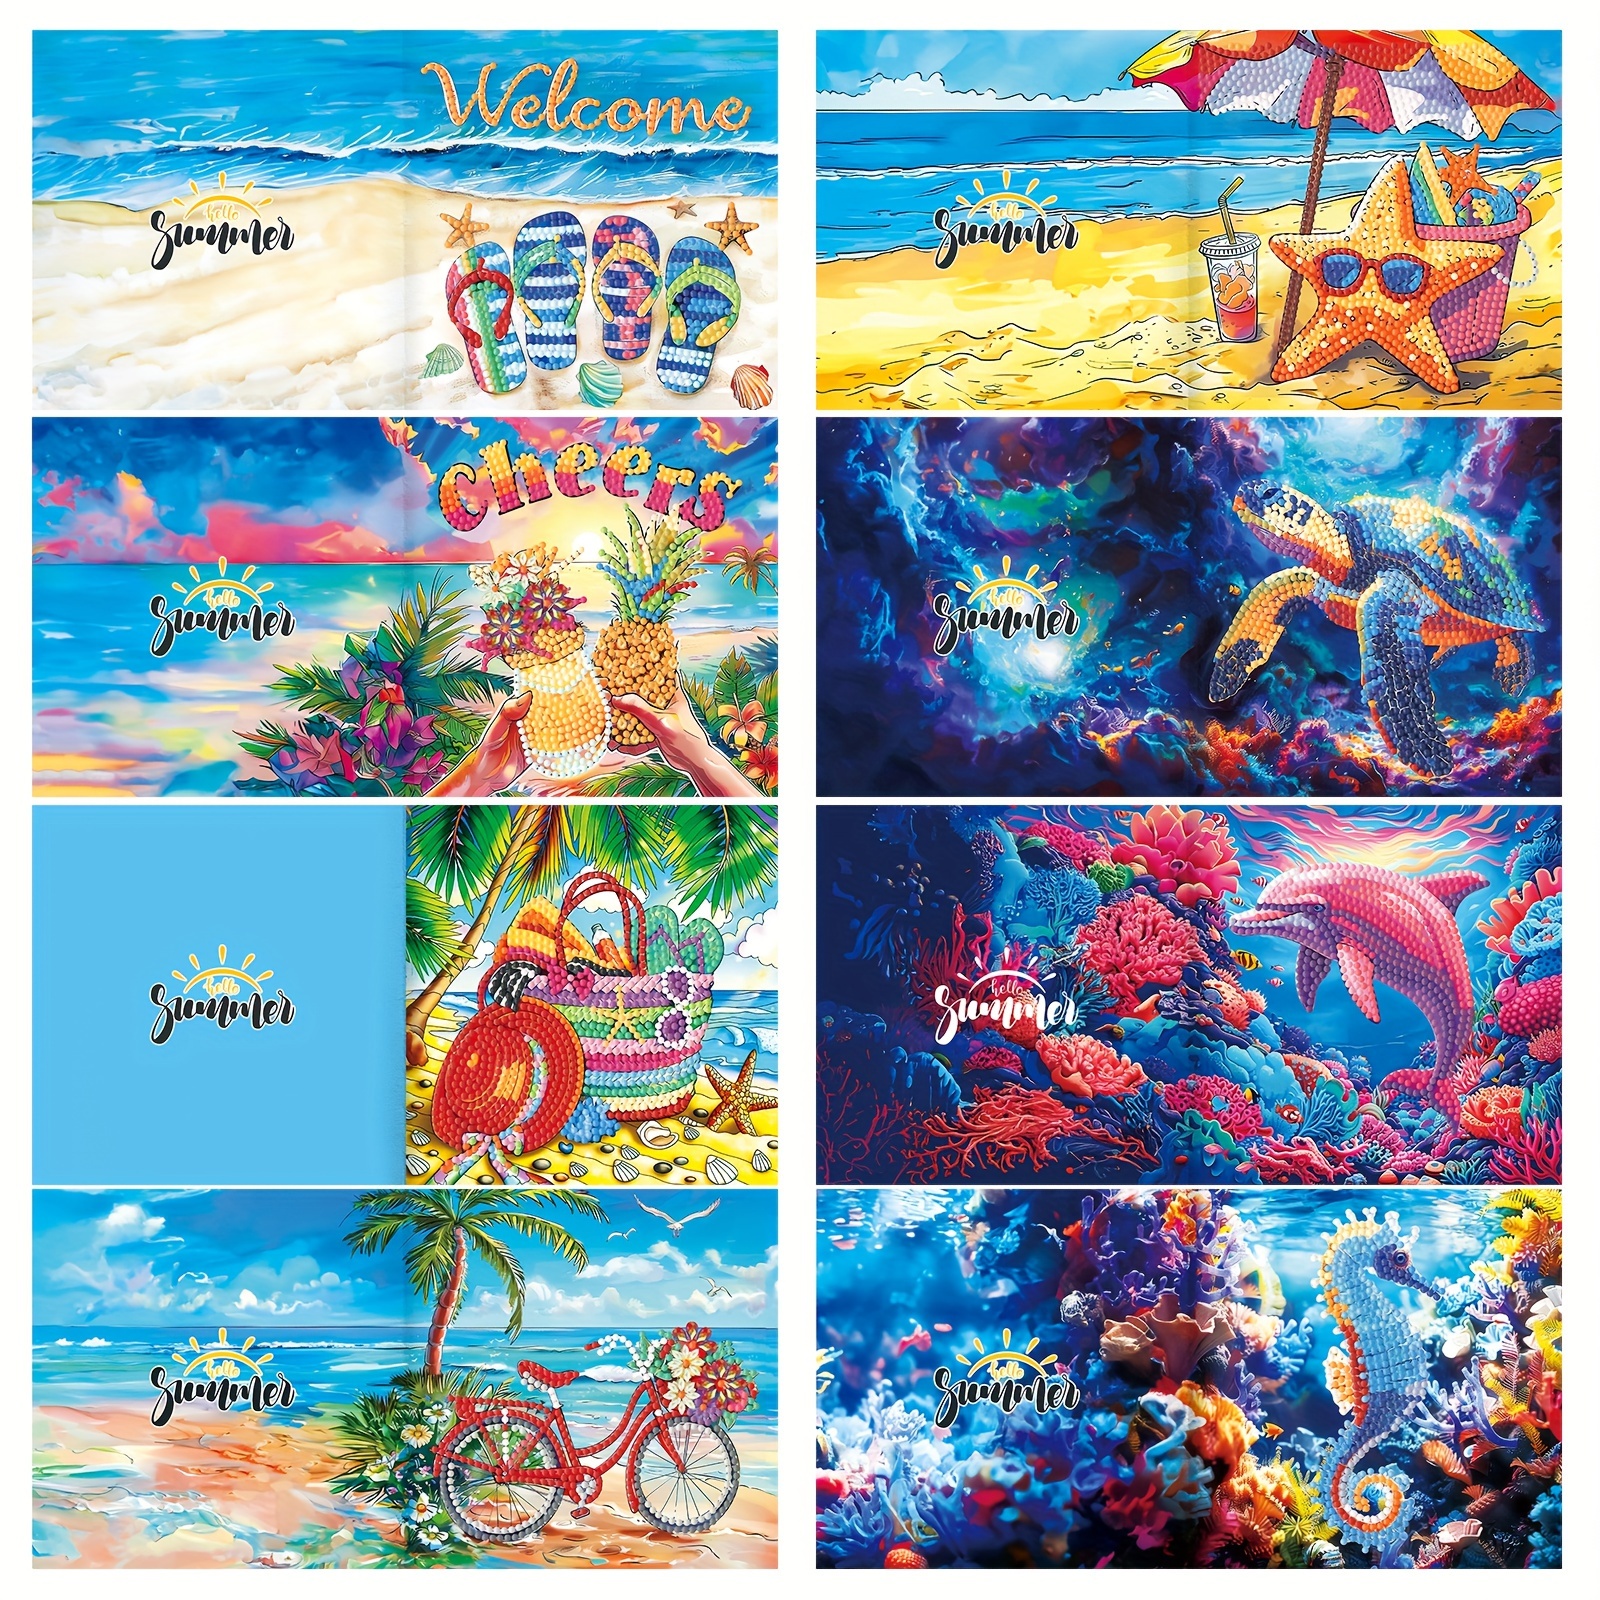 

8pcs, Diy Ocean And Beach Diamond Art Painting Greeting Card, Turtle And Dolphin Diamond Art Greeting Cards For Beginner Cards Gift For Family Friends, Small Business Supplies, Thank You Cards